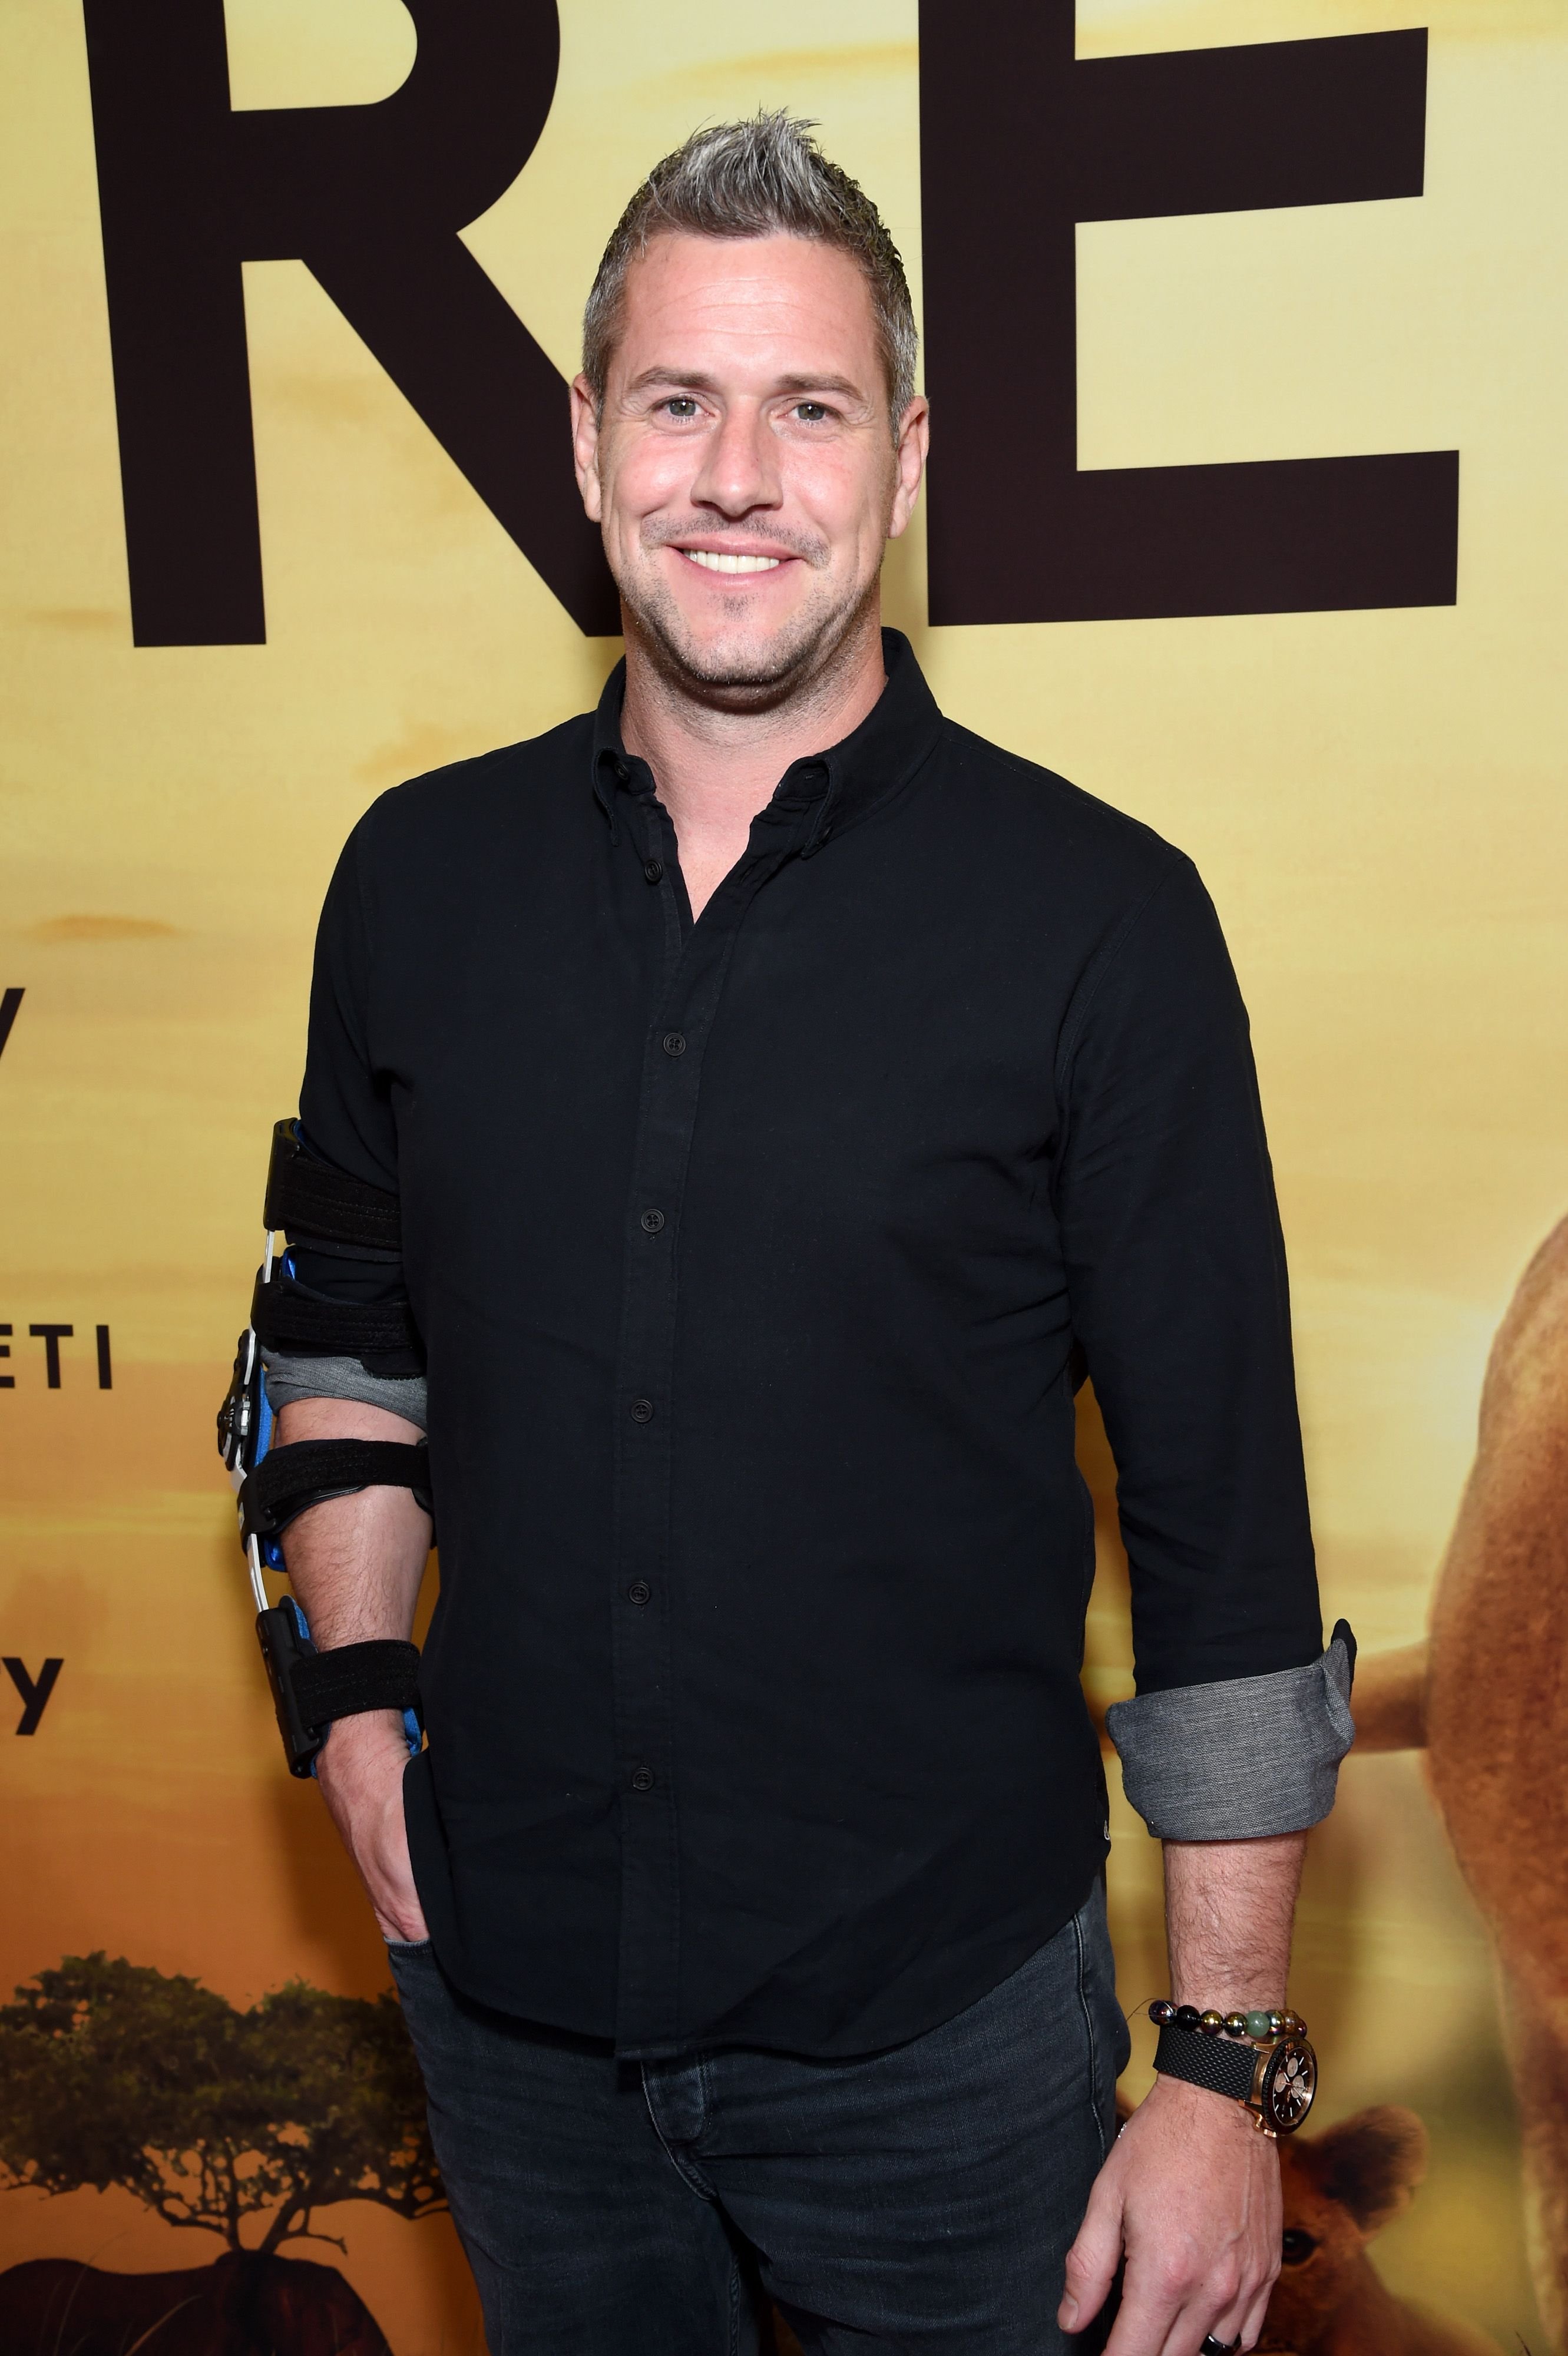 Ant Anstead at Discovery's "Serengeti" premiere at Wallis Annenberg Center for the Performing Arts on July 23, 2019 | Photo: Getty Images